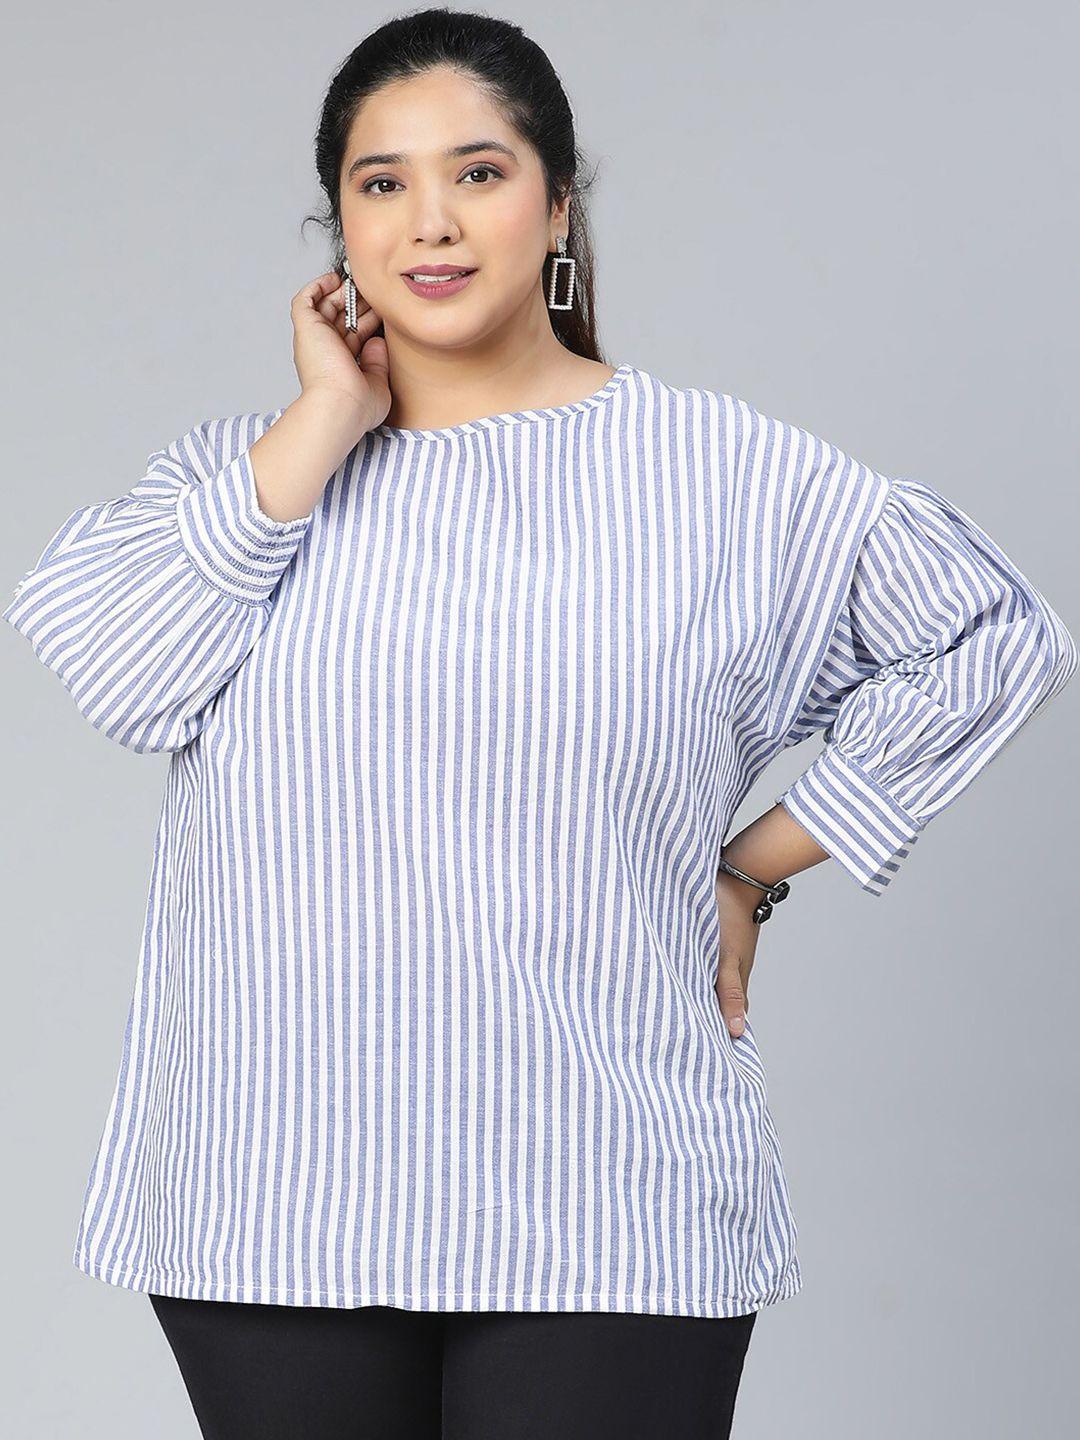 oxolloxo-blue-striped-top